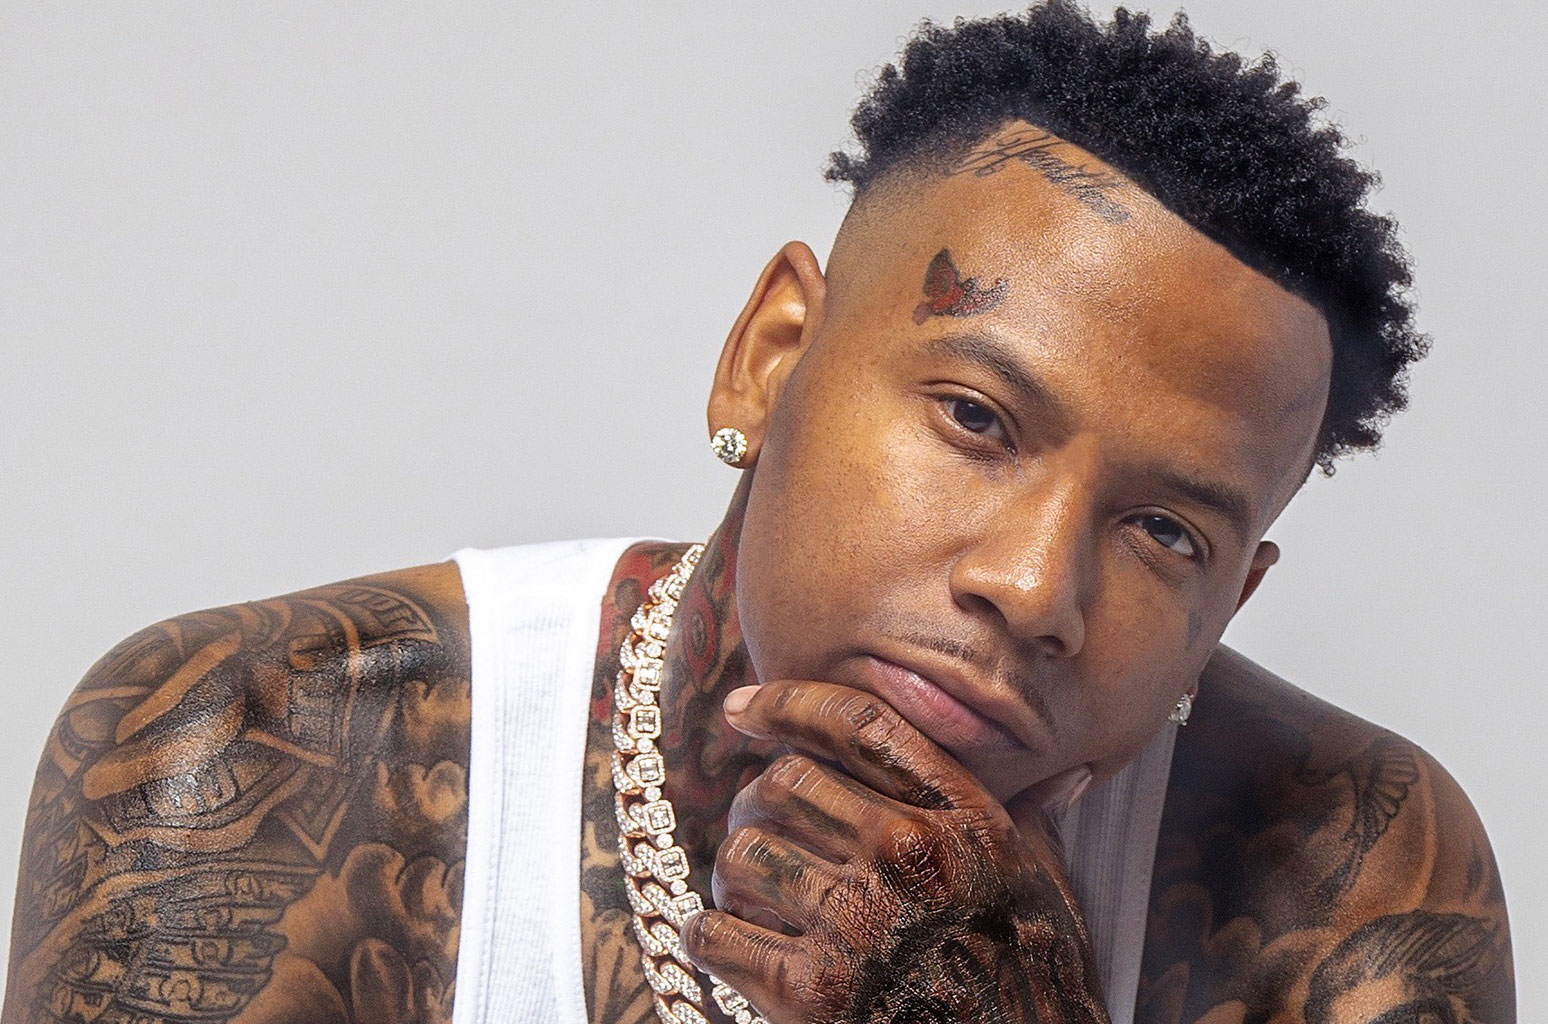 Watch Moneybagg Yo Talk 'Time Served,' Roc Nation Deal & Yo Gotti's Valuable Advice in 'On the Block'